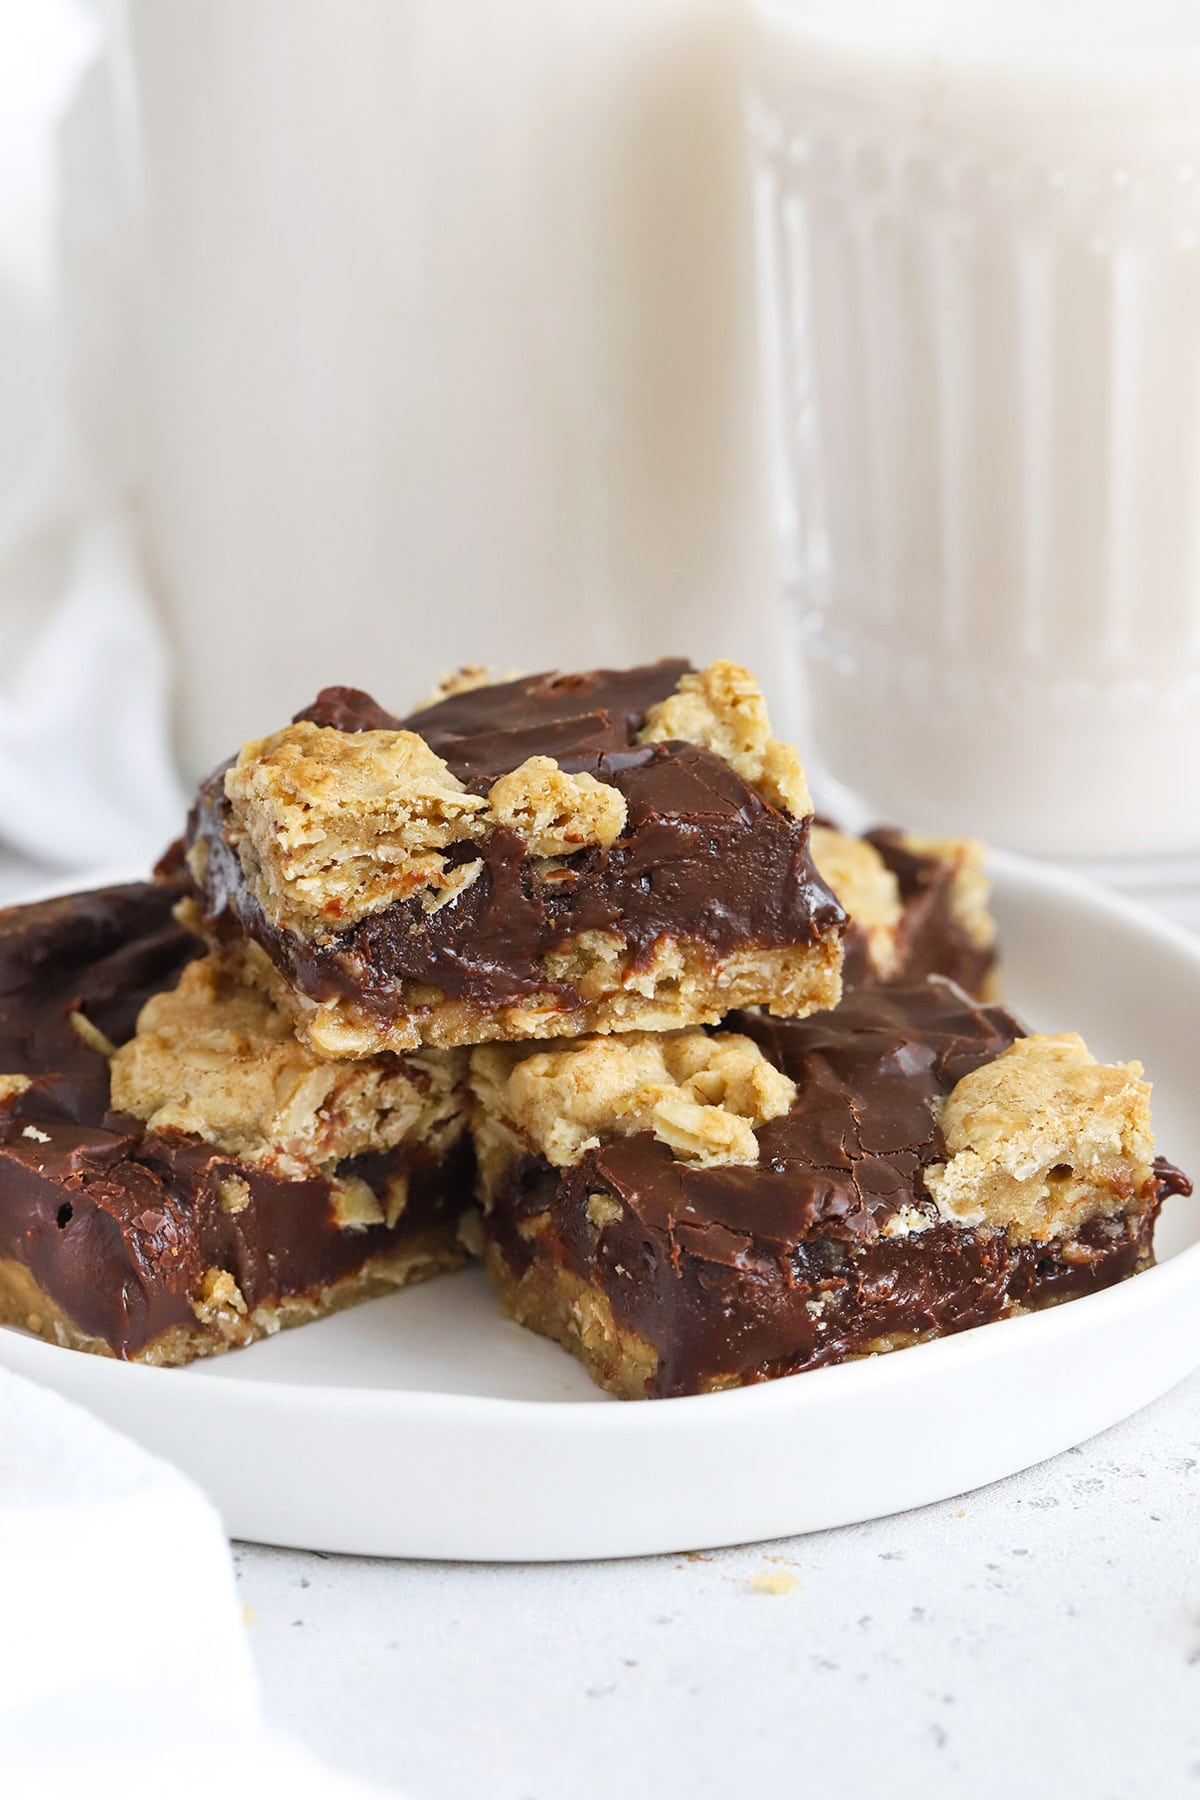 Gluten-Free oatmeal fudge bars cut into squares and stacked on a plate